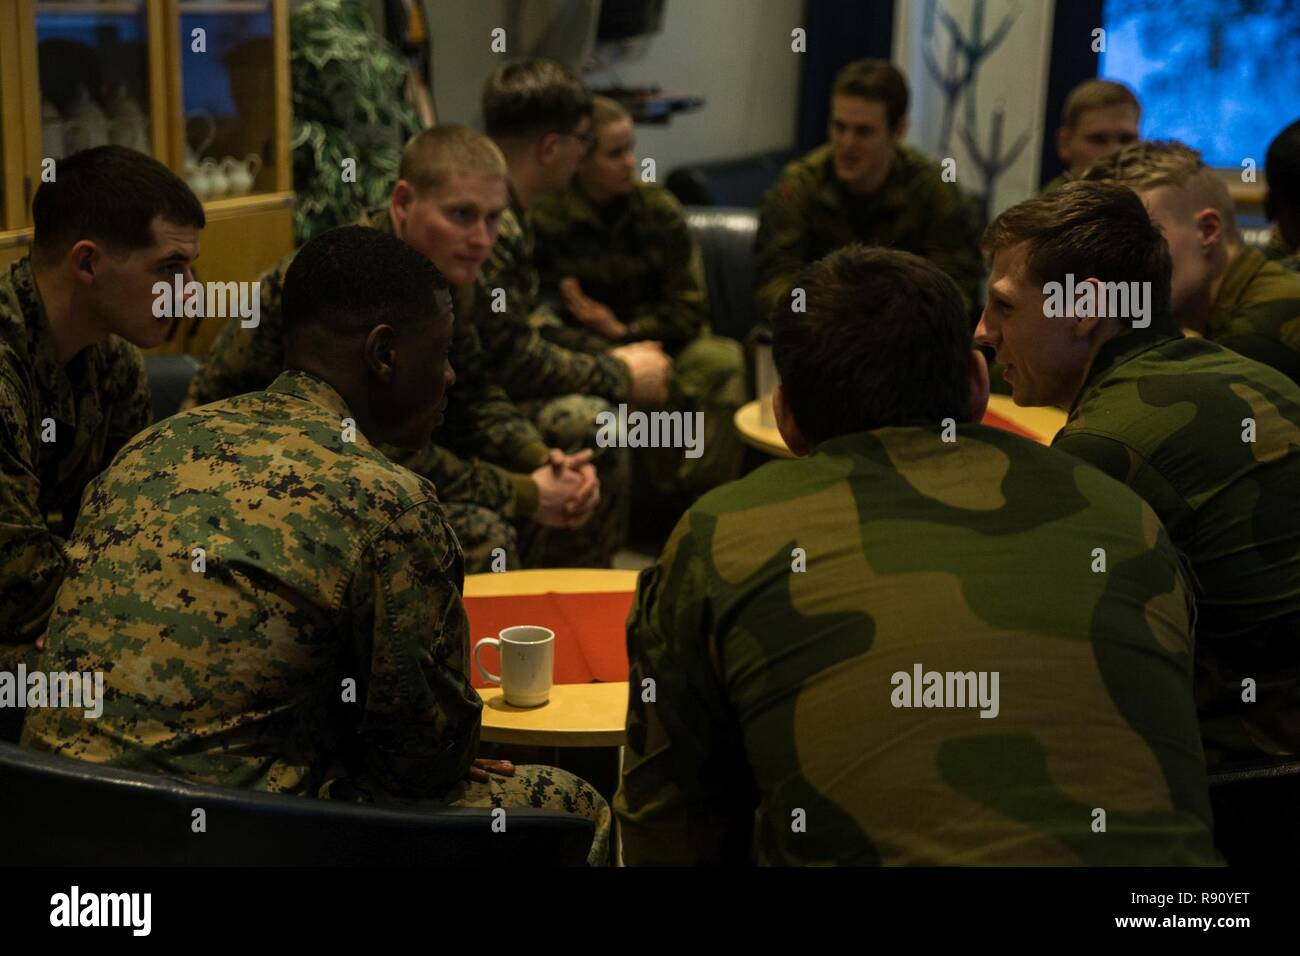 U.S. Marines with Marine Forces Europe and Africa’s Marine Corps Element-Norway and Norwegian Army soldiers compare and contrast their military’s noncommissioned officer corps during a Navy Infantry Enlisted Leadership course in Setermoen, Norway, Dec. 6, 2018. This course consisted of various class lectures and physical training on how to lead and conduct themselves as NCOs. Stock Photo